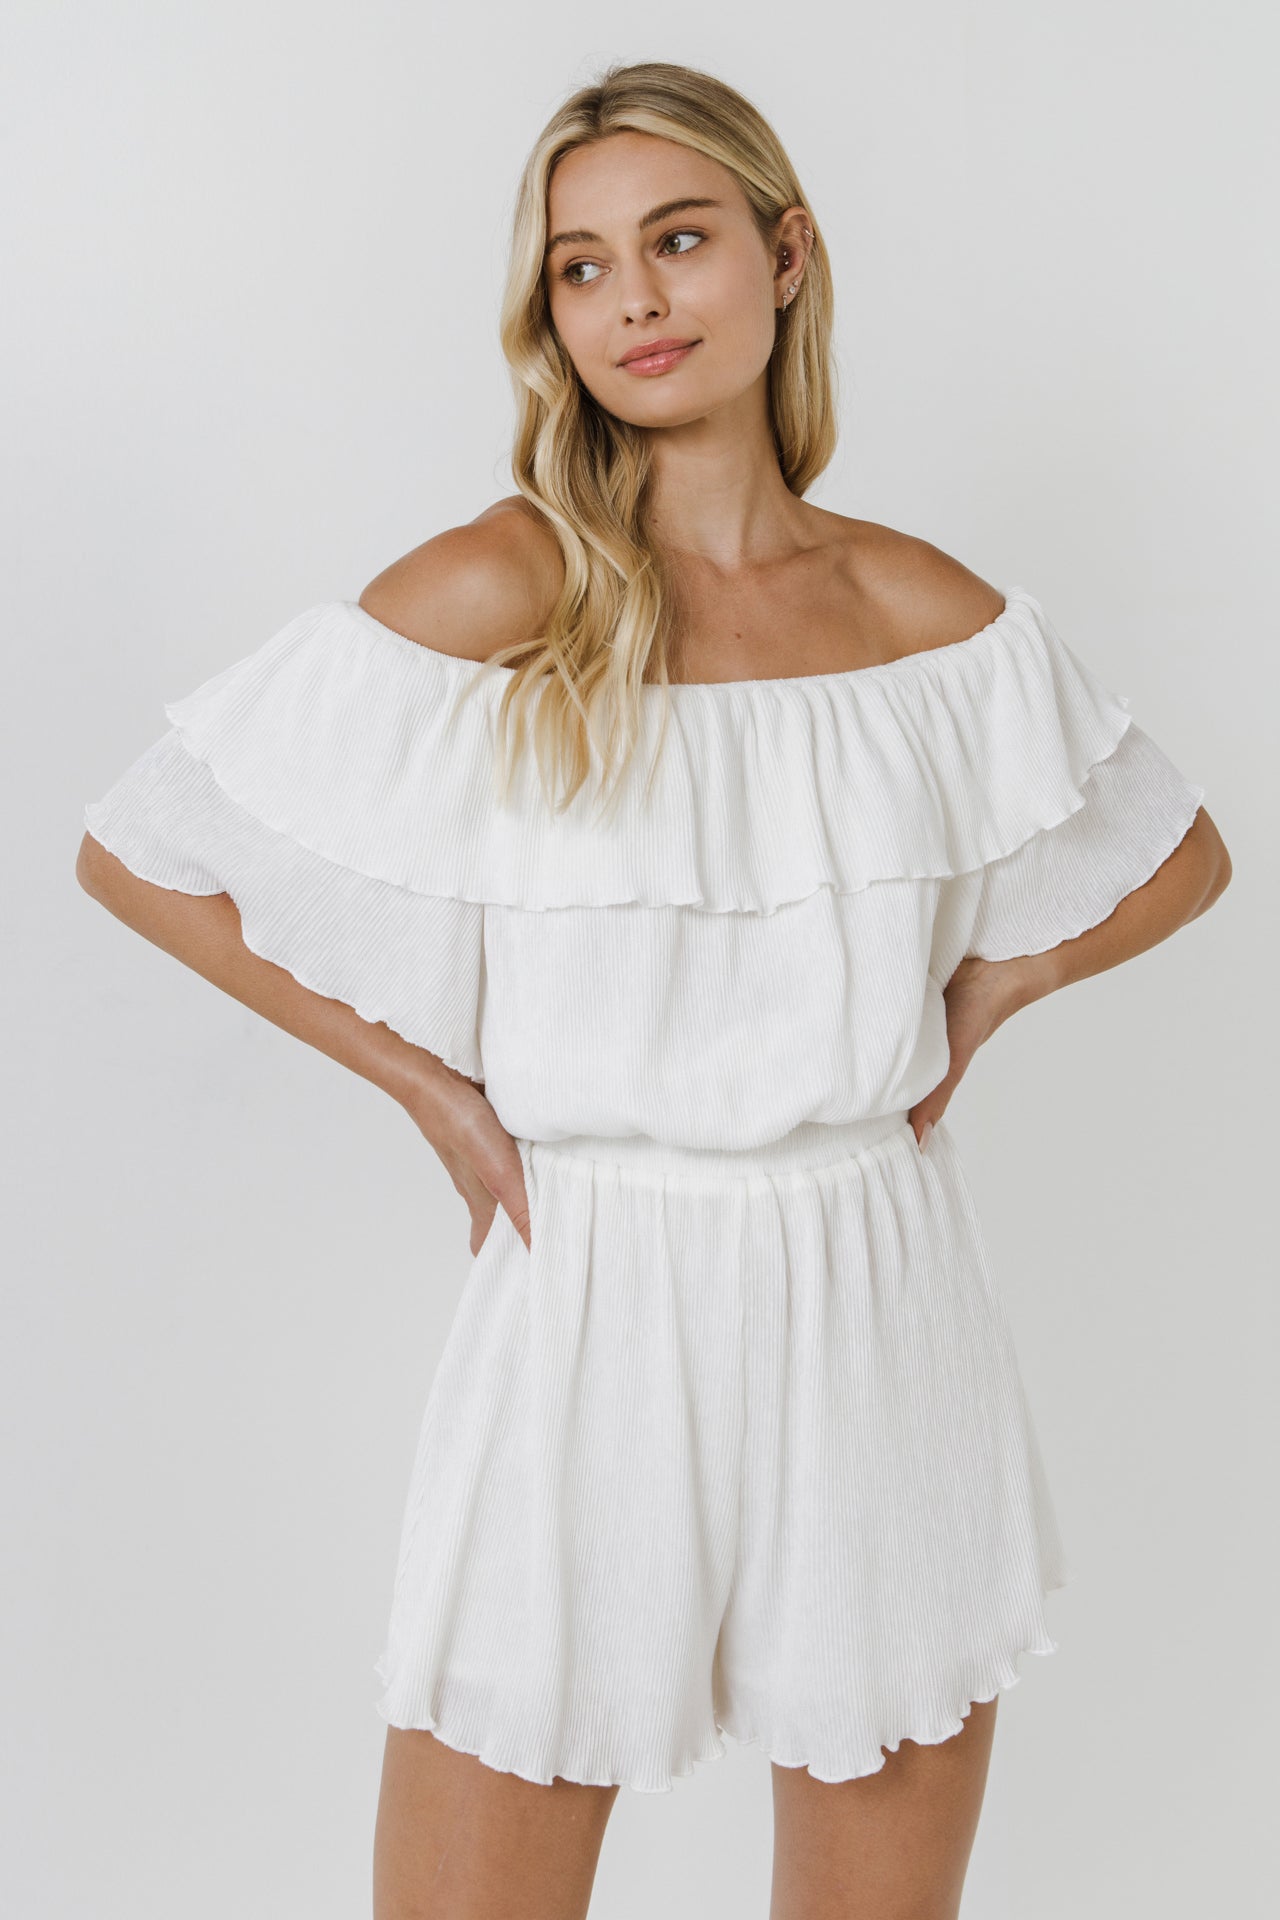 FREE THE ROSES - Texture Knit Ruffled Romper - ROMPERS available at Objectrare